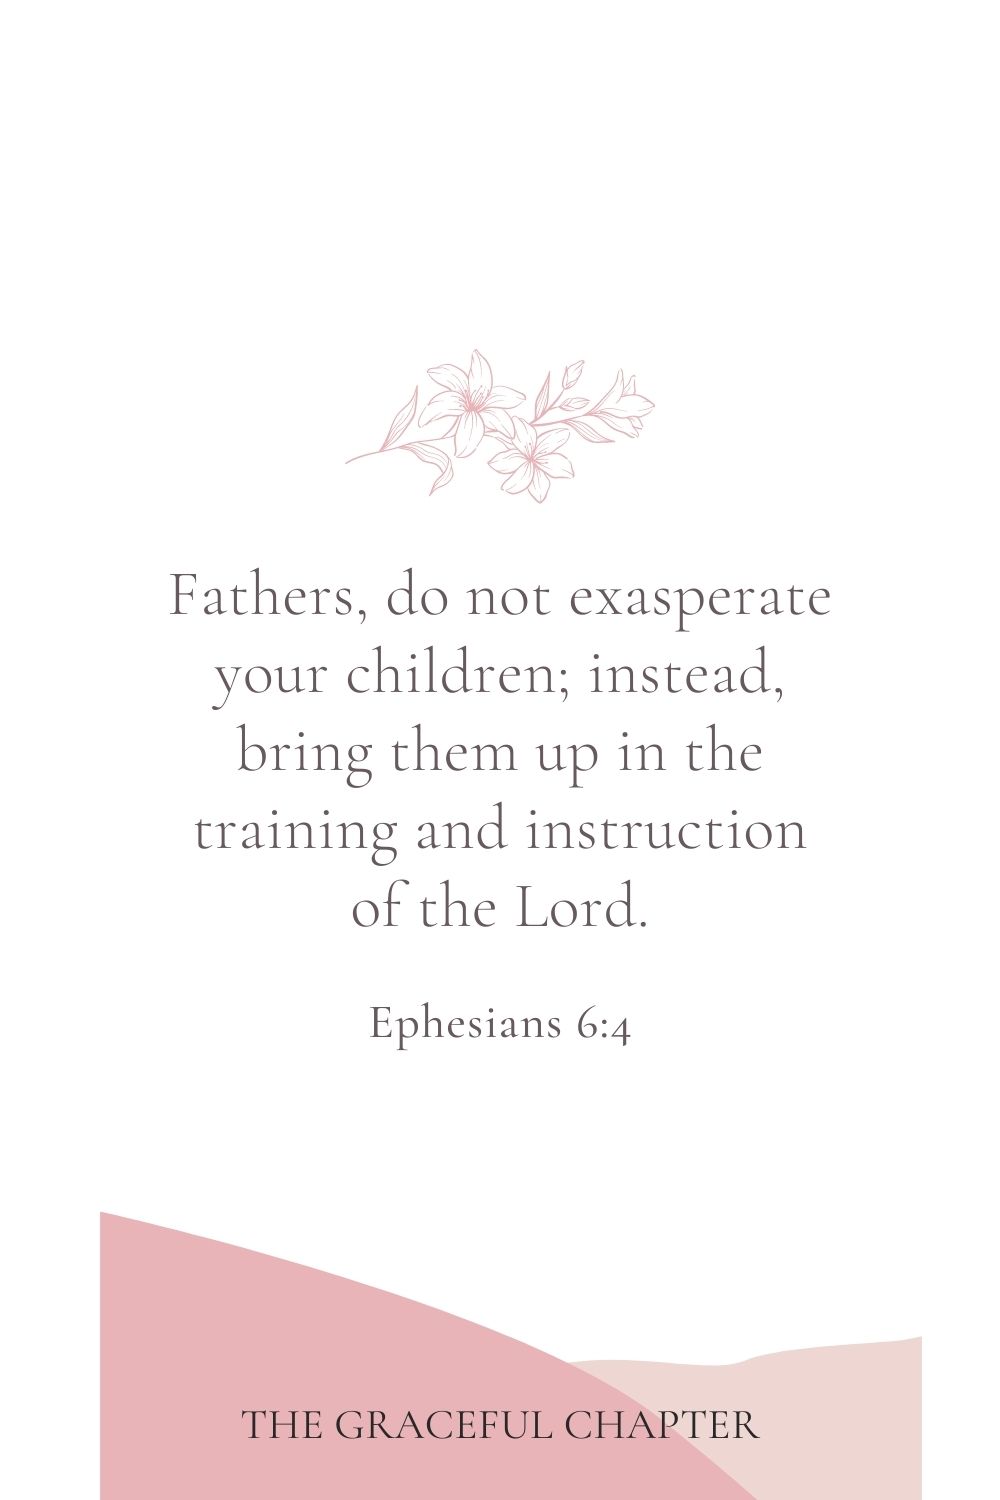 Fathers, do not exasperate your children; instead, bring them up in the training and instruction of the Lord. Ephesians 6:4